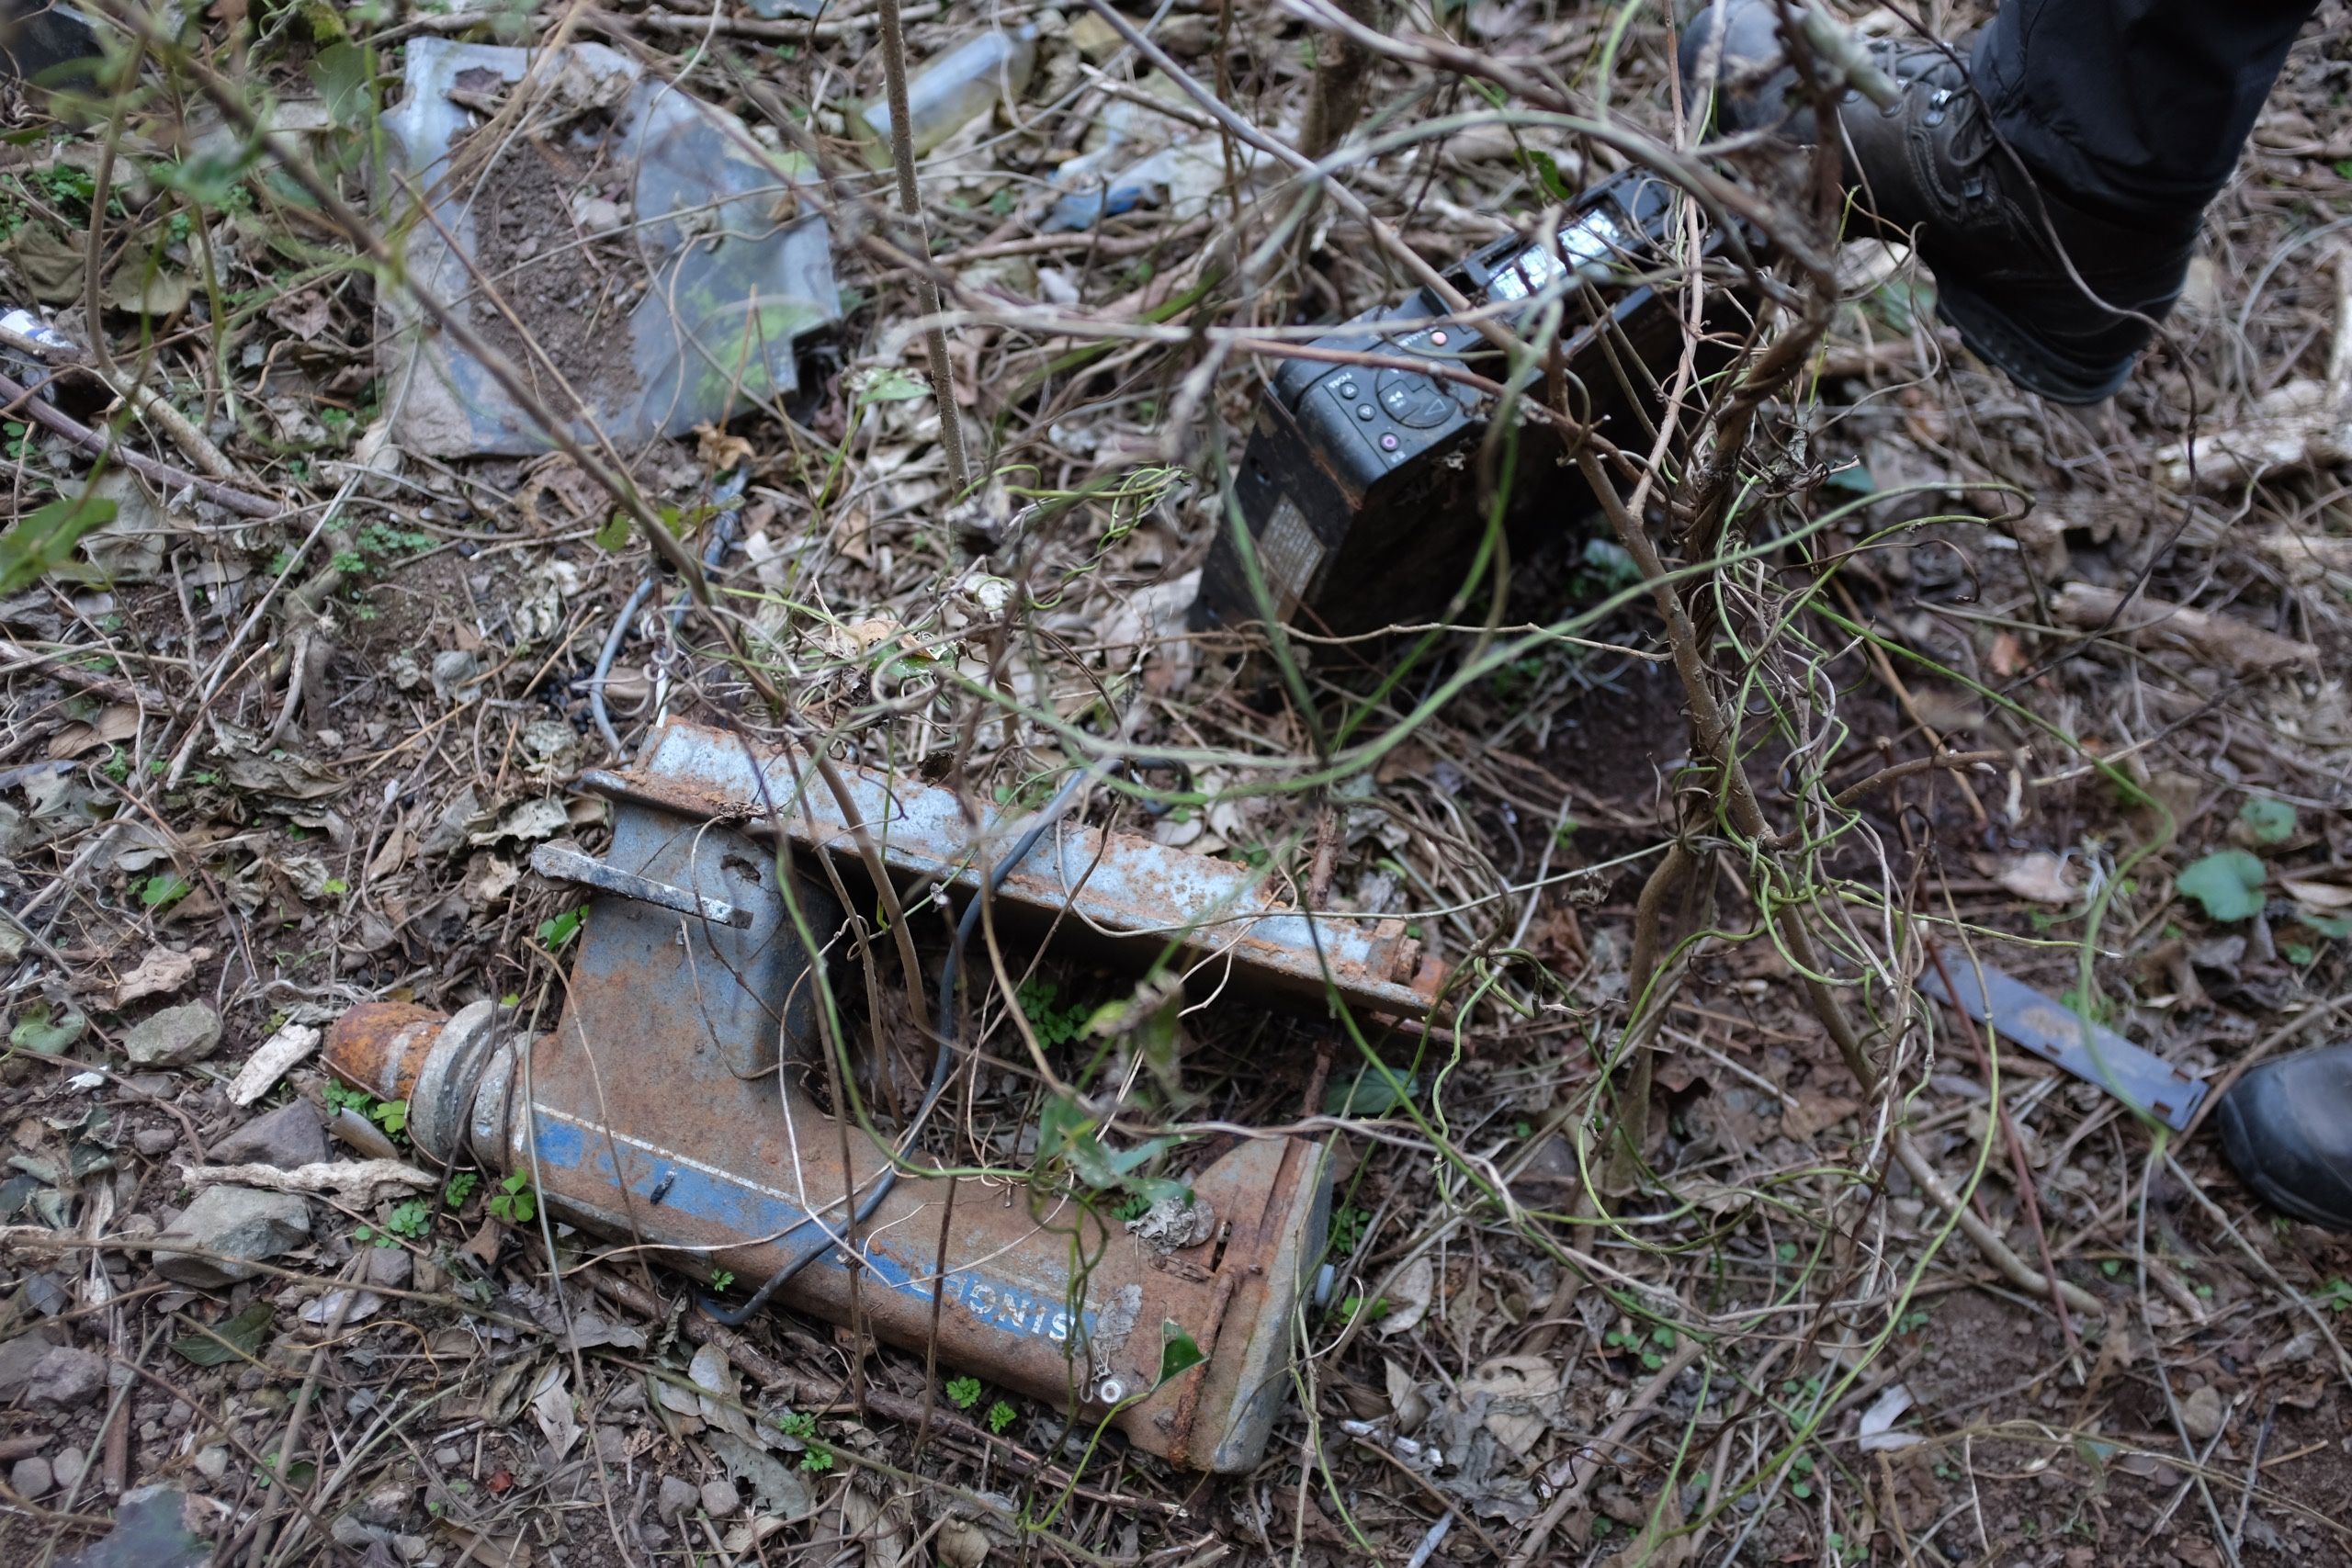 A man’s hiking boot steps on a discarded VCR, which lies among other pieces of garbage.